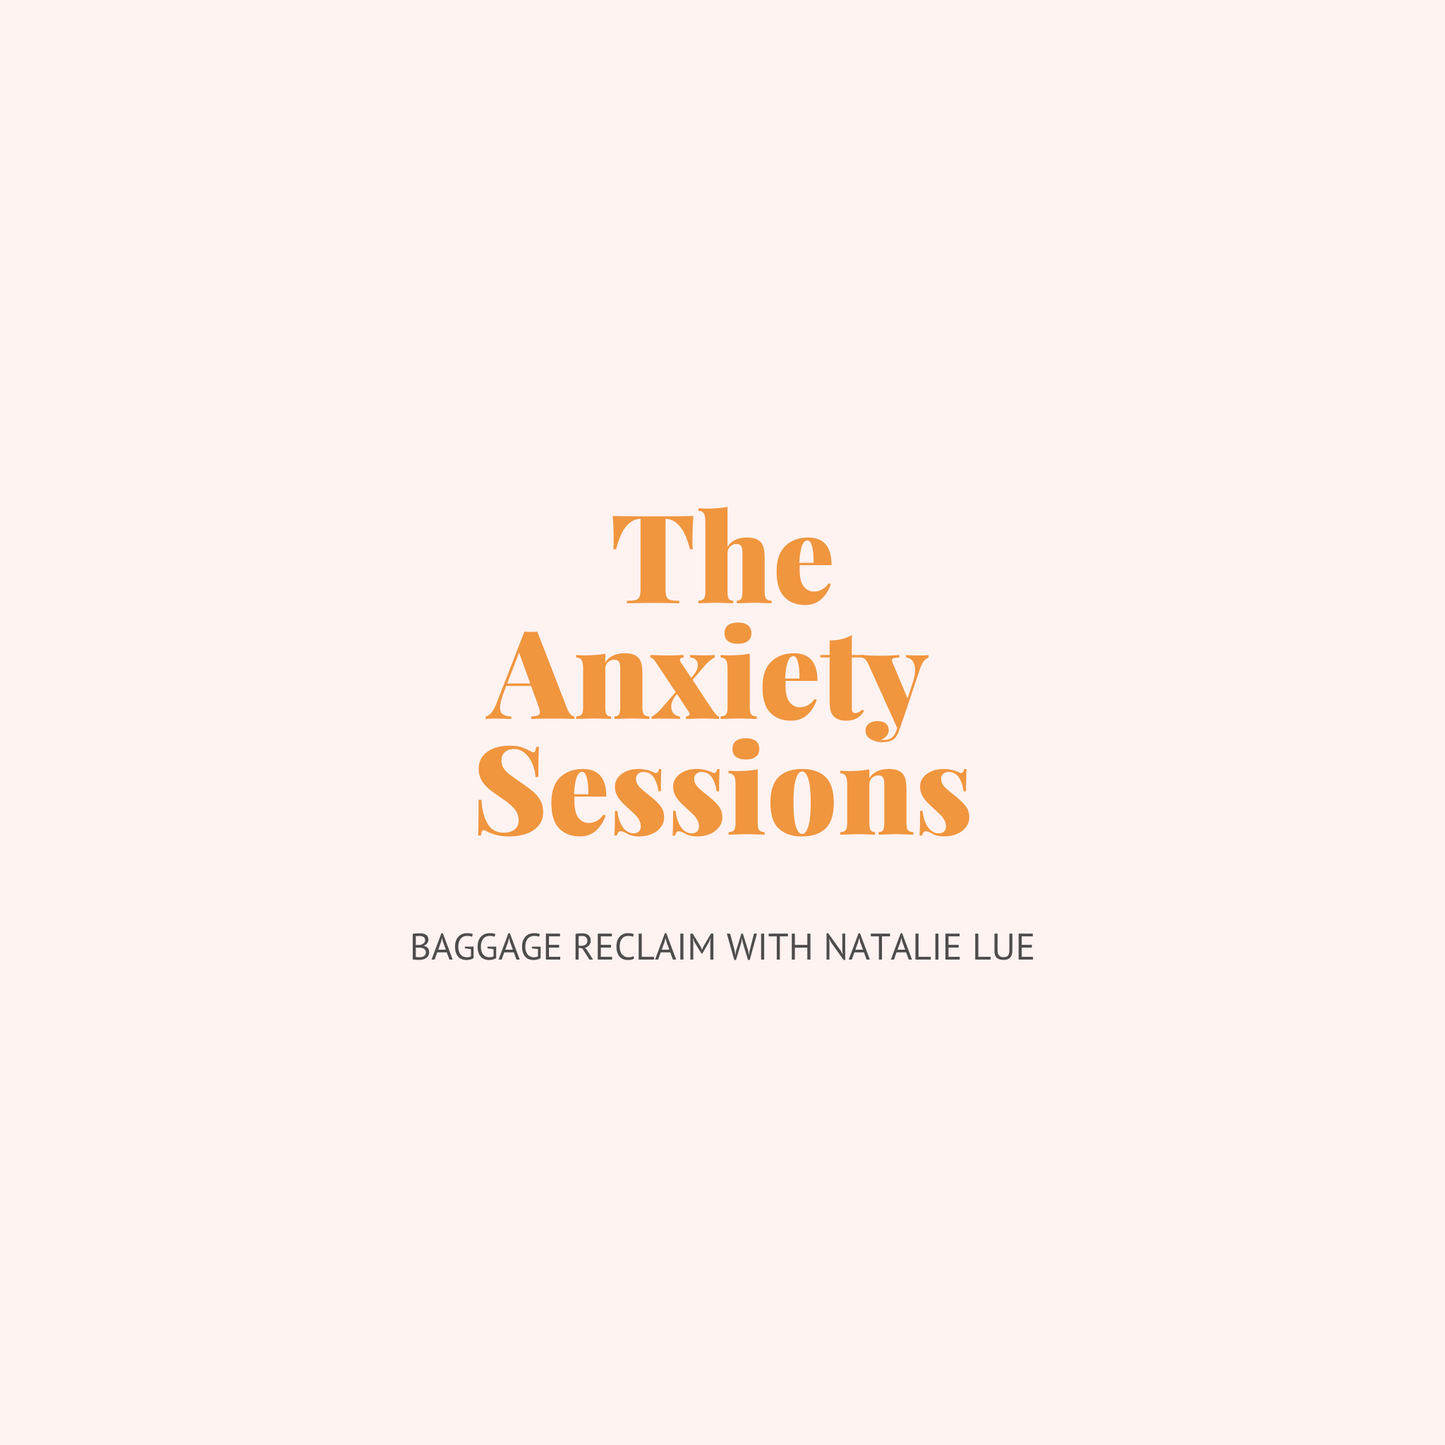 The Anxiety Sessions audio short course with Natalie Lue, Baggage Reclaim